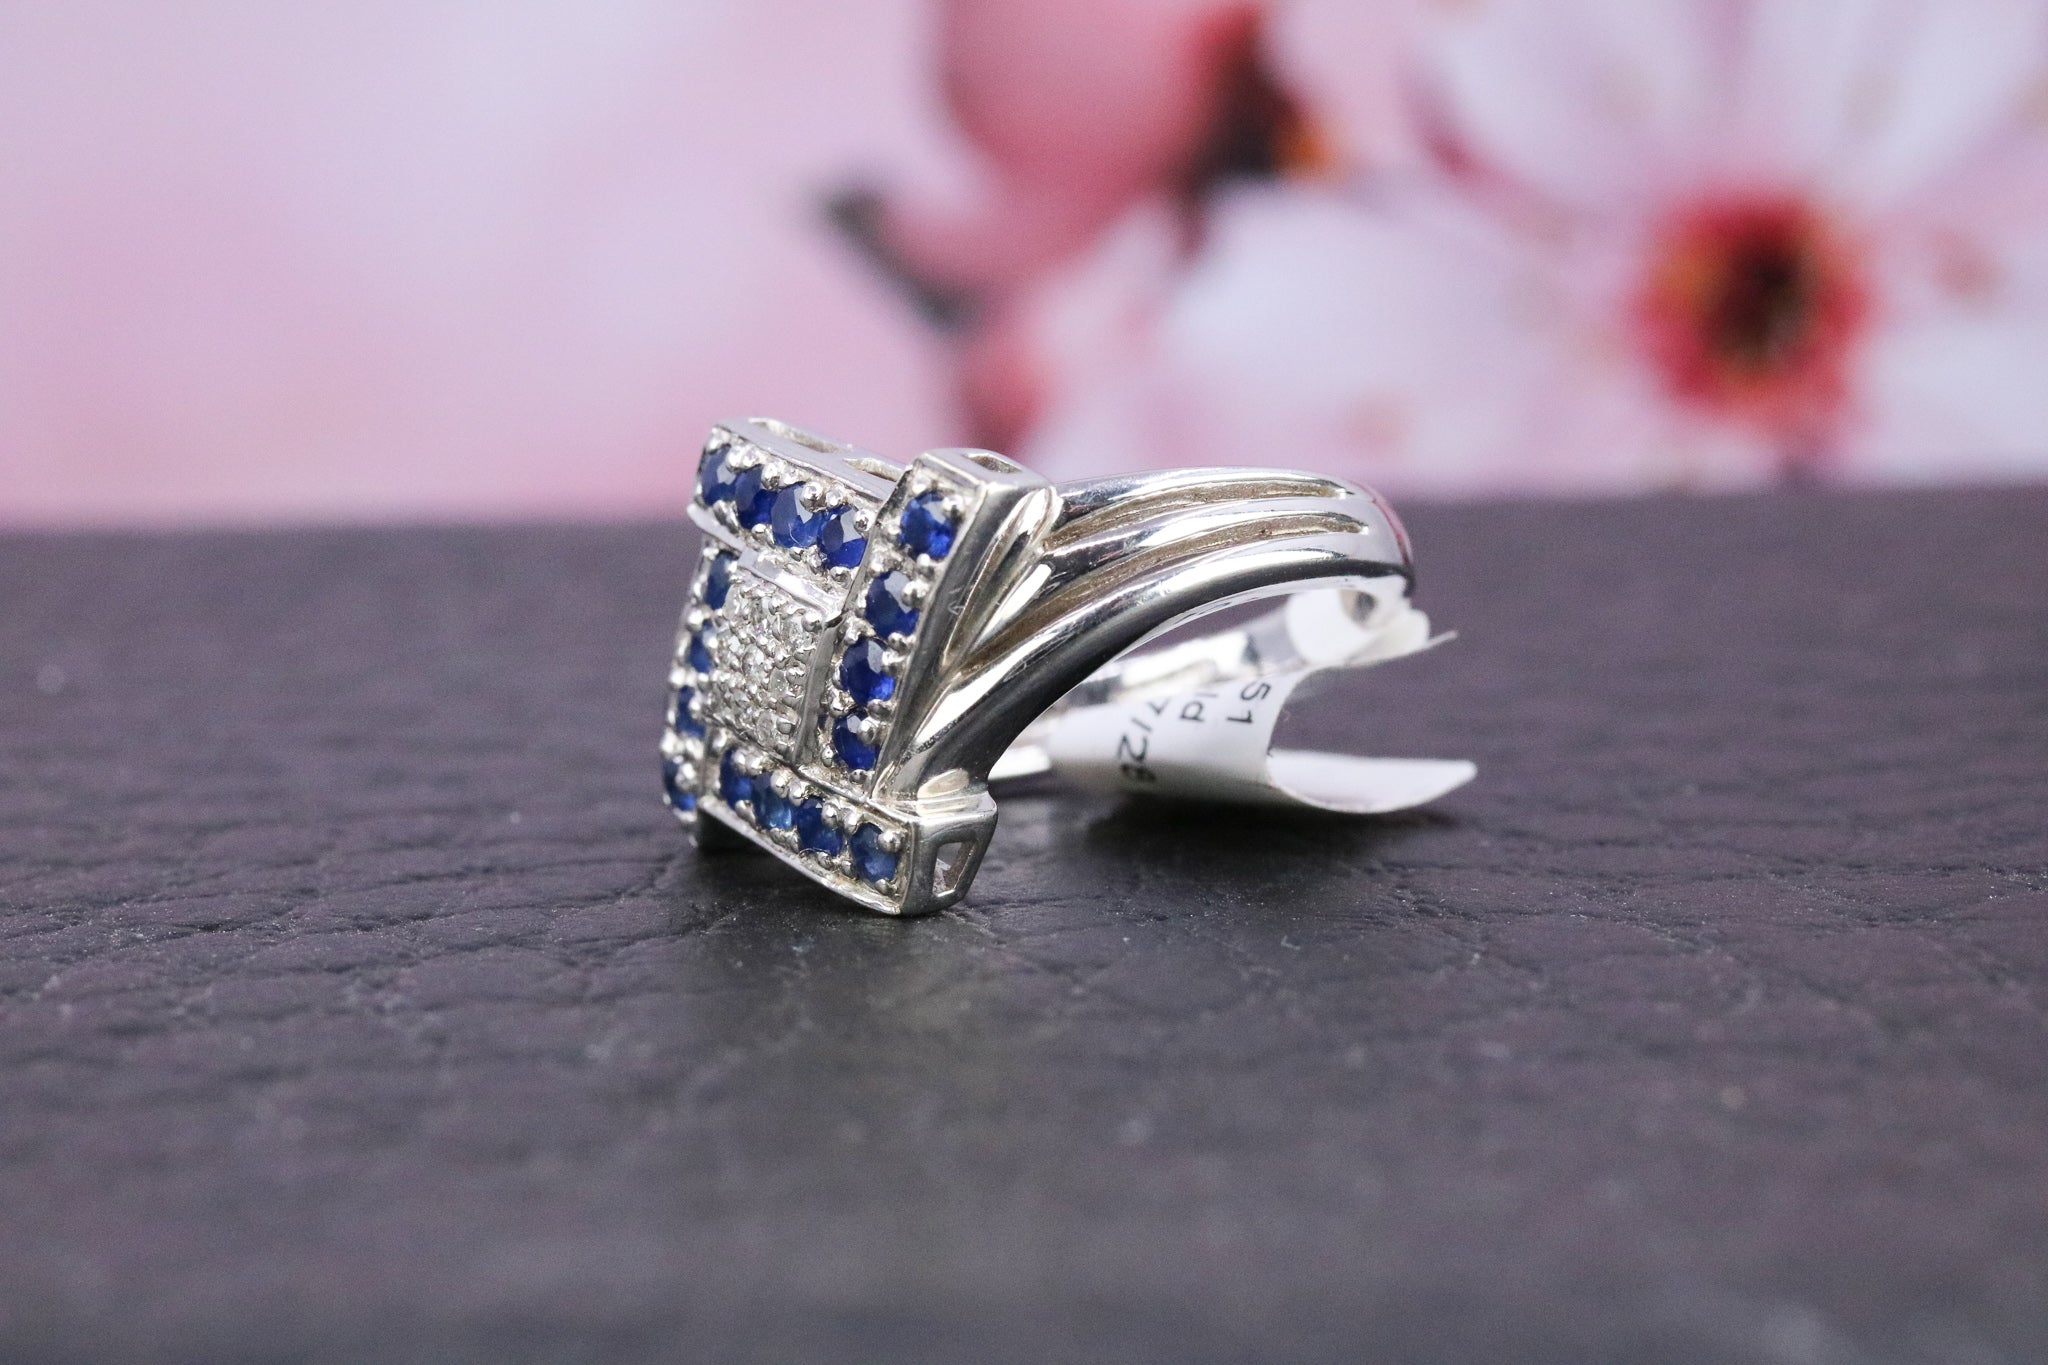 9ct White Gold Diamond Ring - CO1151 - Hallmark Jewellers Formby & The Jewellers Bench Widnes